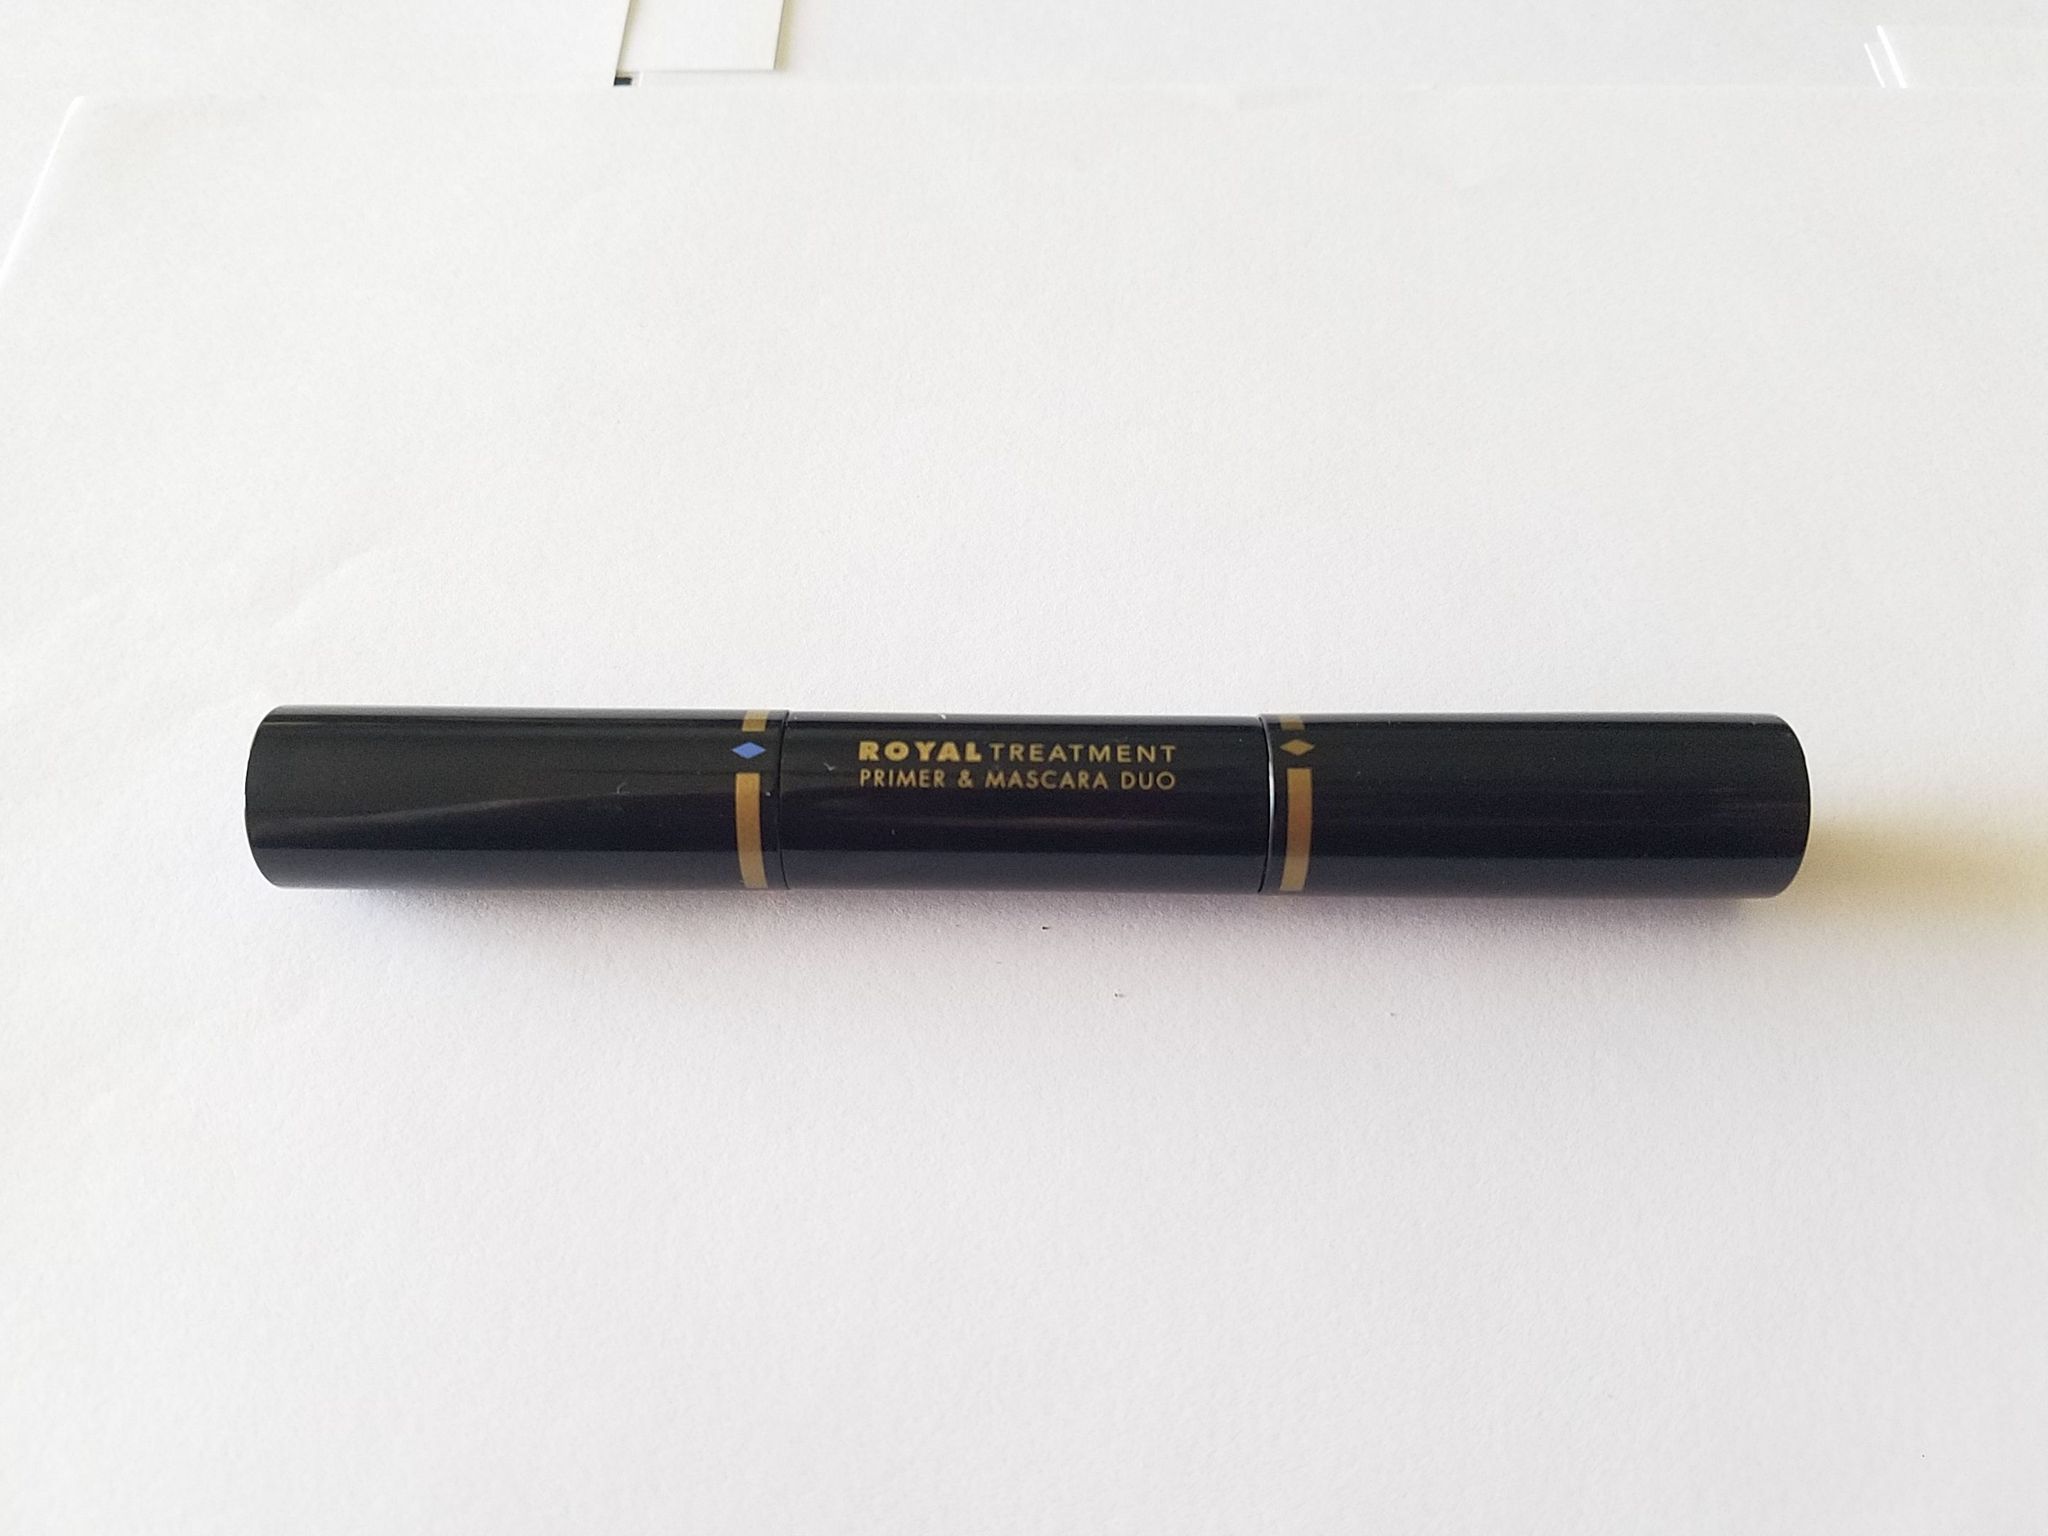 ROYAL TREATMENT Primer & Mascara Duo - Check Reviews and Prices of ...